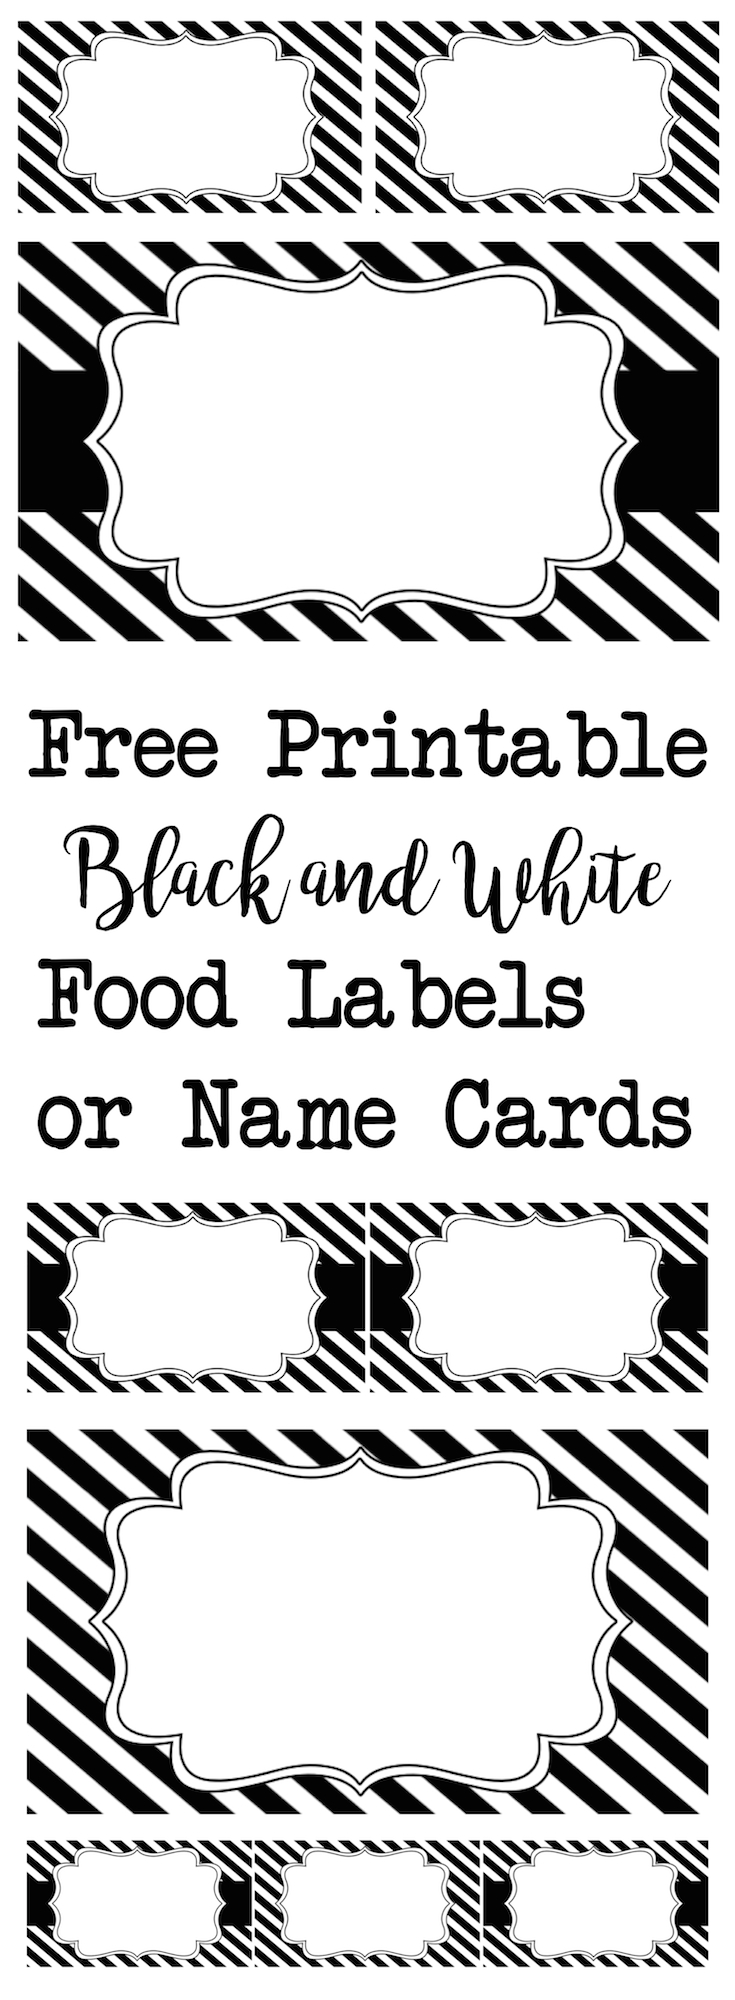 Black And White Food Labels Or Name Cards Paper Trail Design